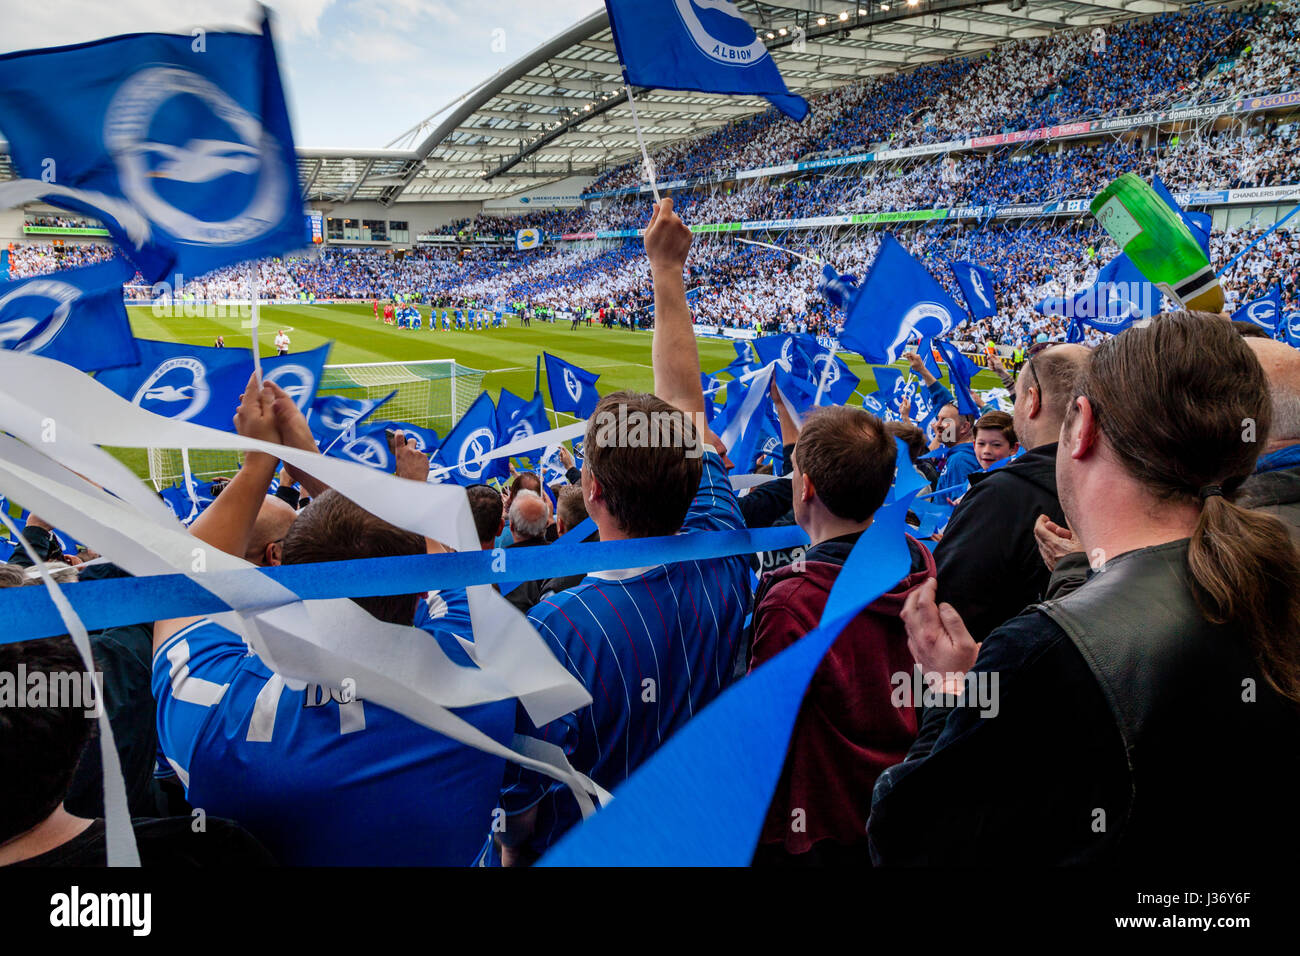 Brighton and Hove Albion Football Fans Cheer Their Team On To The Pitch For The Final Game Of The Season After Securing Promotion, Brighton, UK Stock Photo